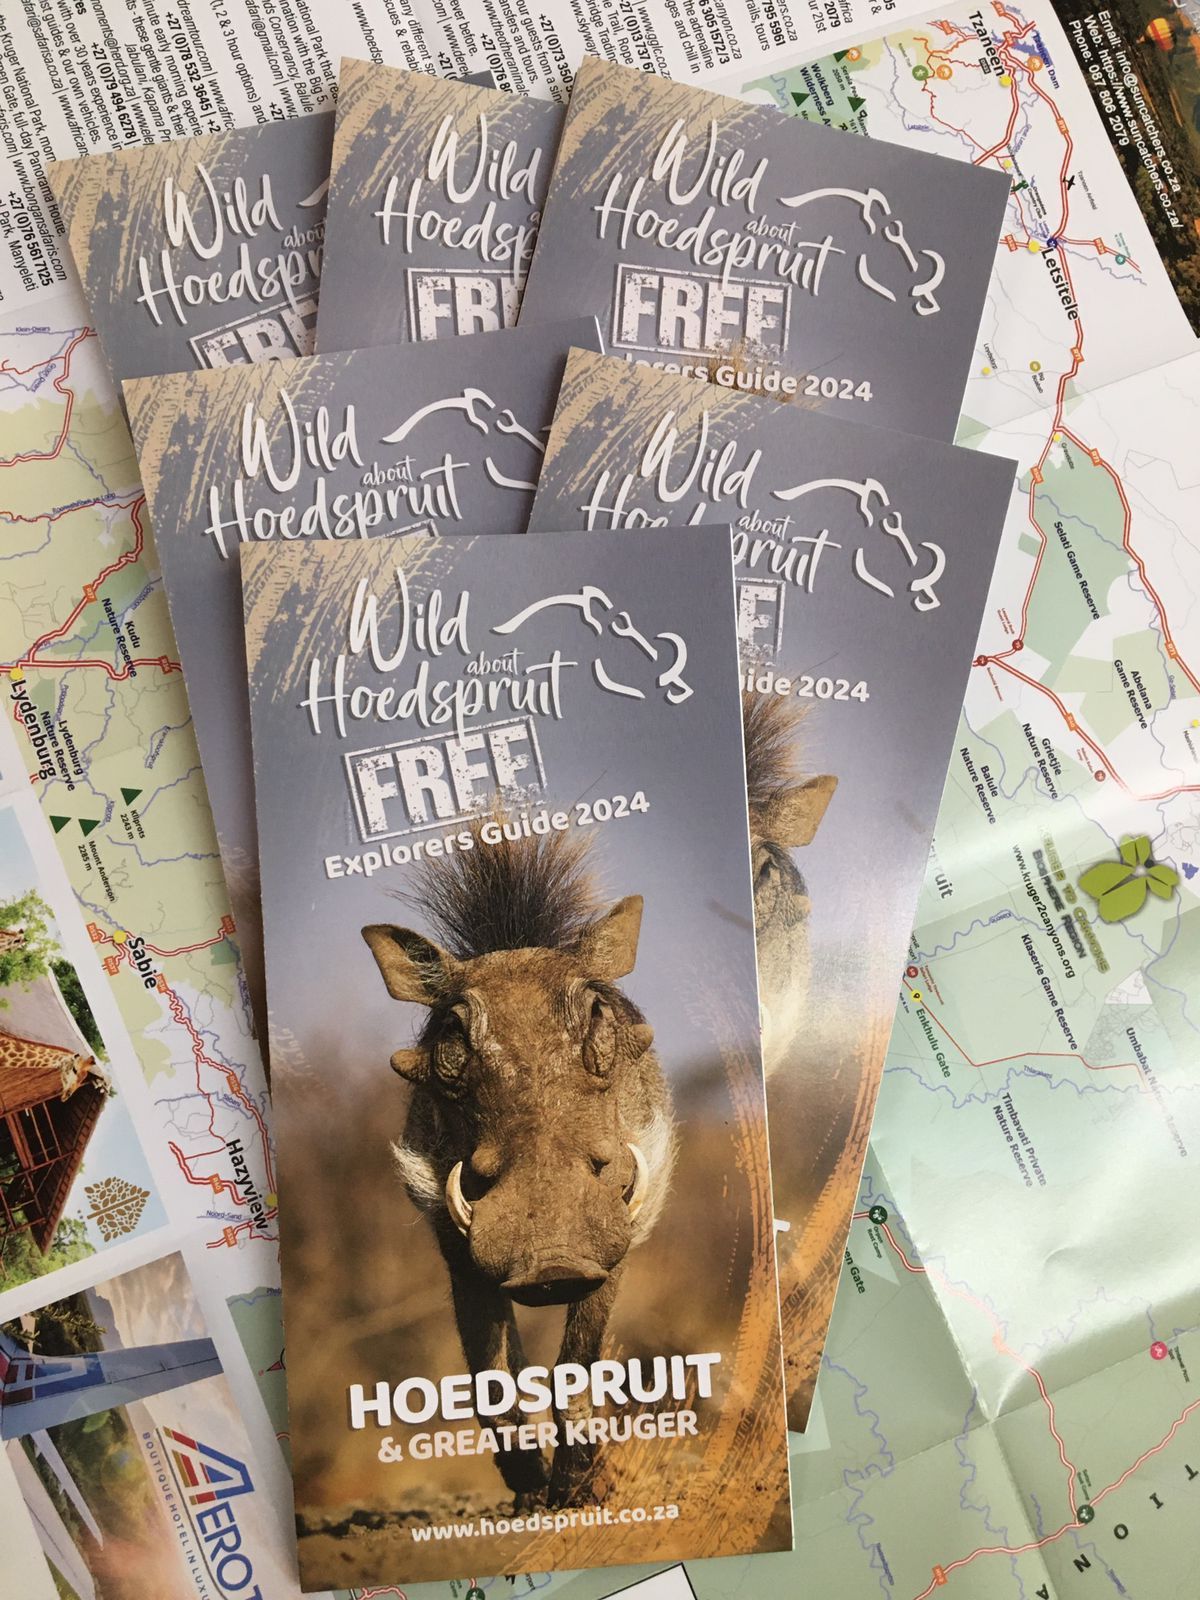 A bunch of brochures with a picture of a warthog on them are sitting on top of a map.